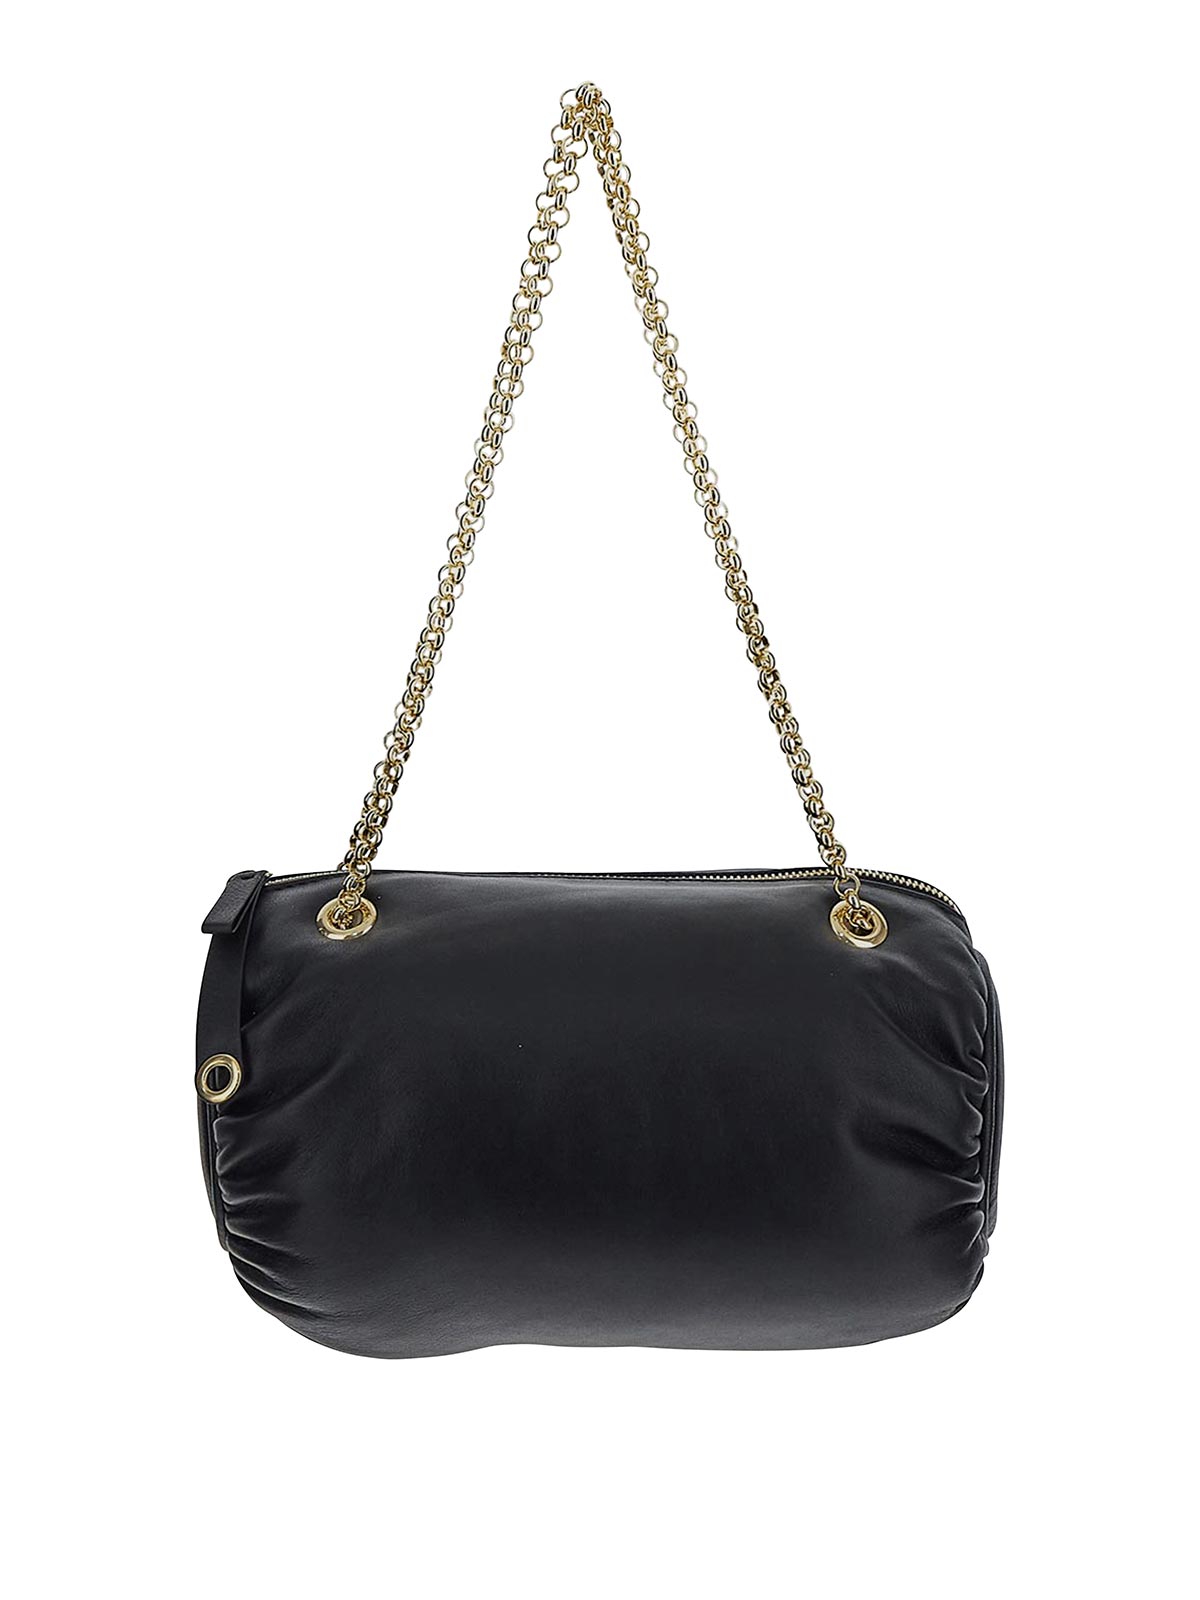 MARINE SERRE PILLOW BAG IN BLACK WITH CHAIN SHOULDER STRAP